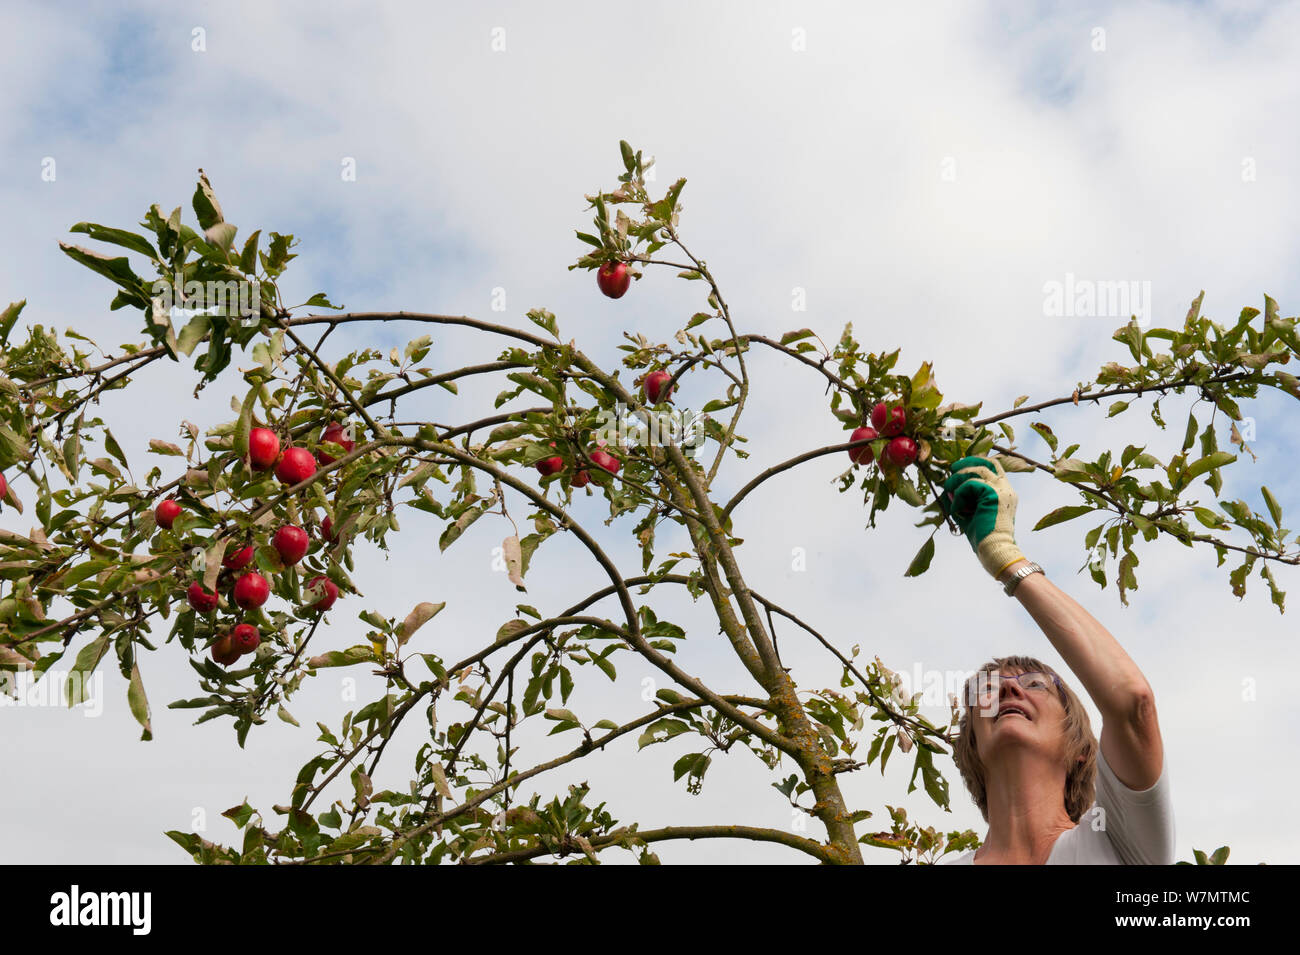 Volunteer picking Crab apples (Malus baccata) from tree, Old Sleningford Community Farm, North Yorkshire, England, UK, September 2011. Stock Photo